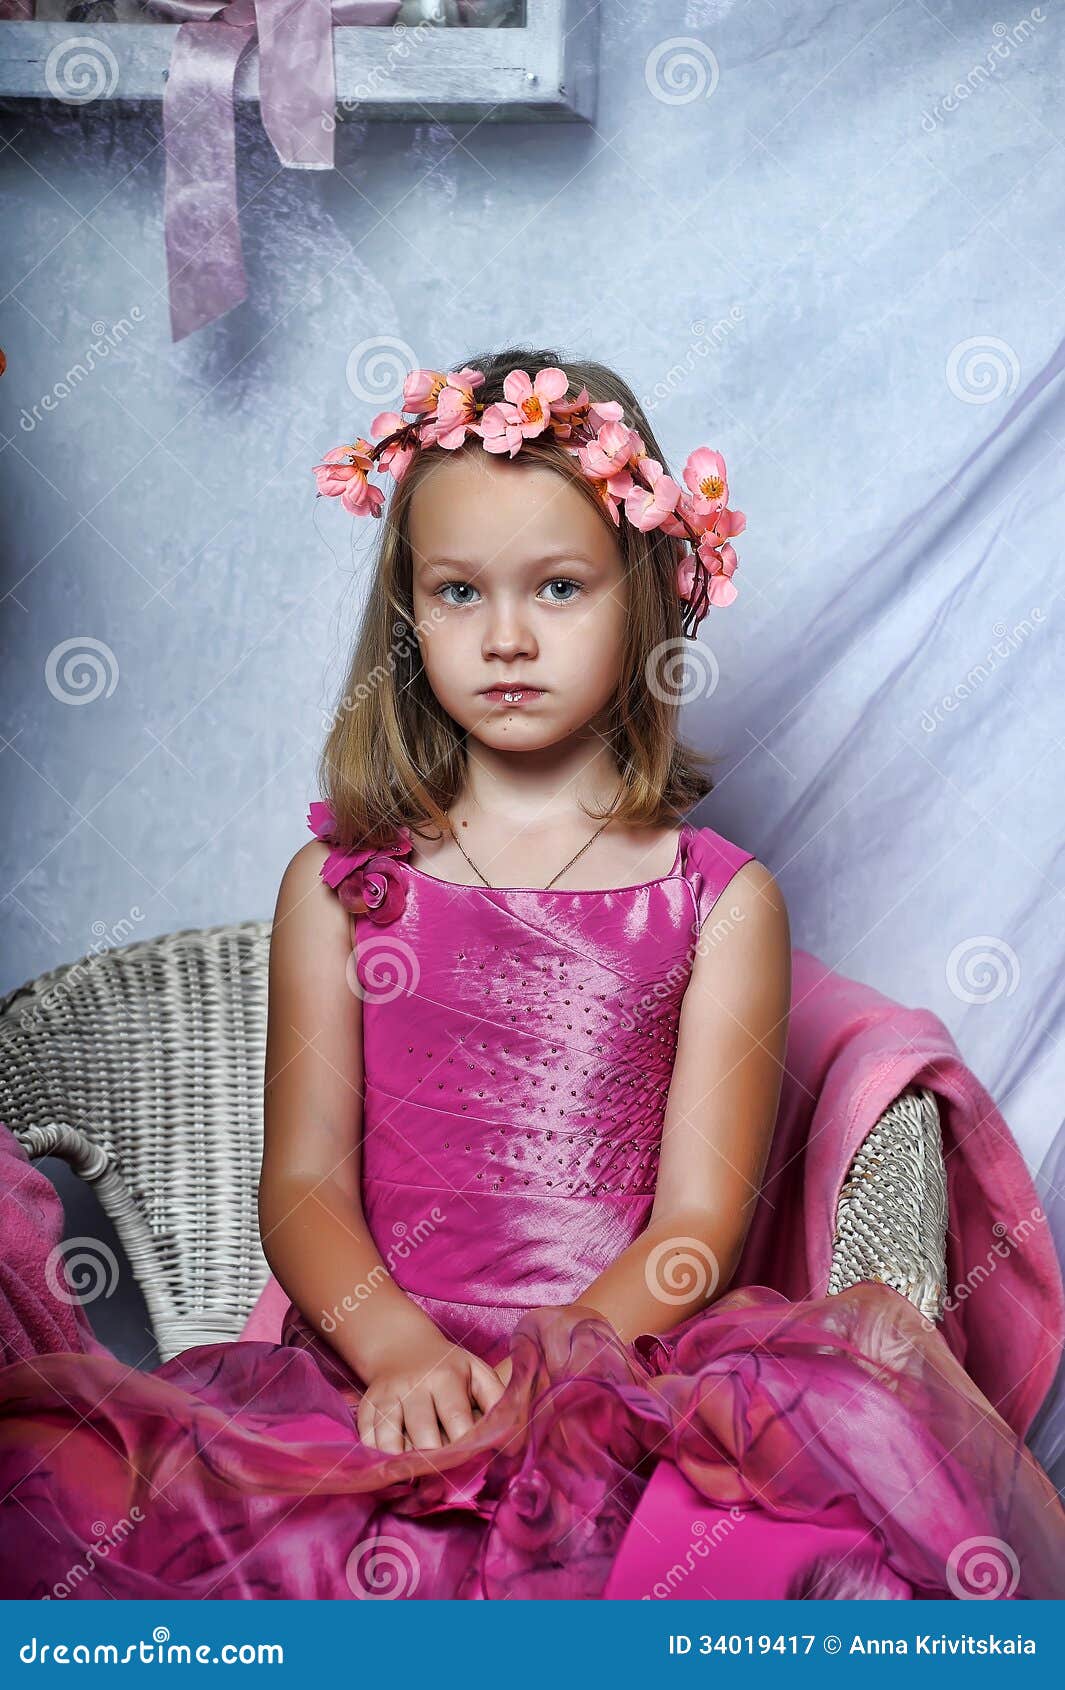 Girl in a pink dress stock image. Image of european, beautiful - 34019417